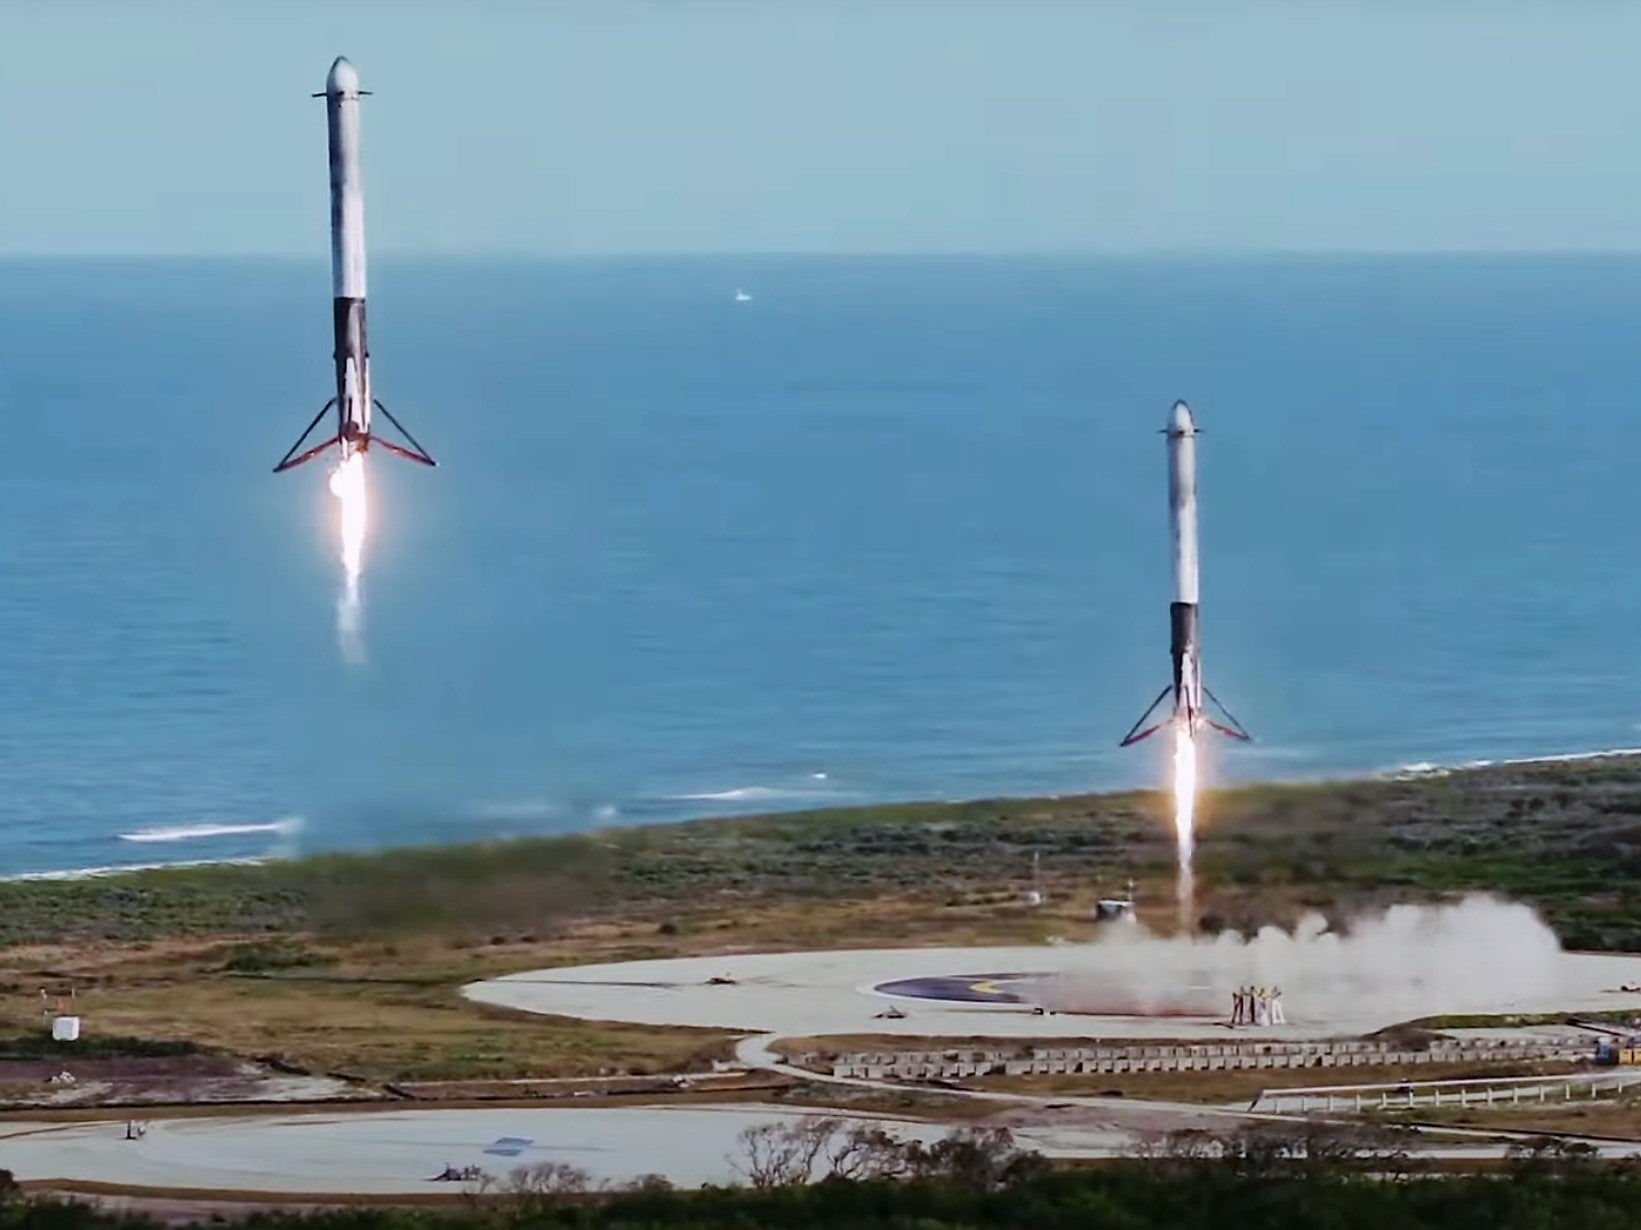 SpaceX first began reusing Falcon 9 rockets for missions in 2017